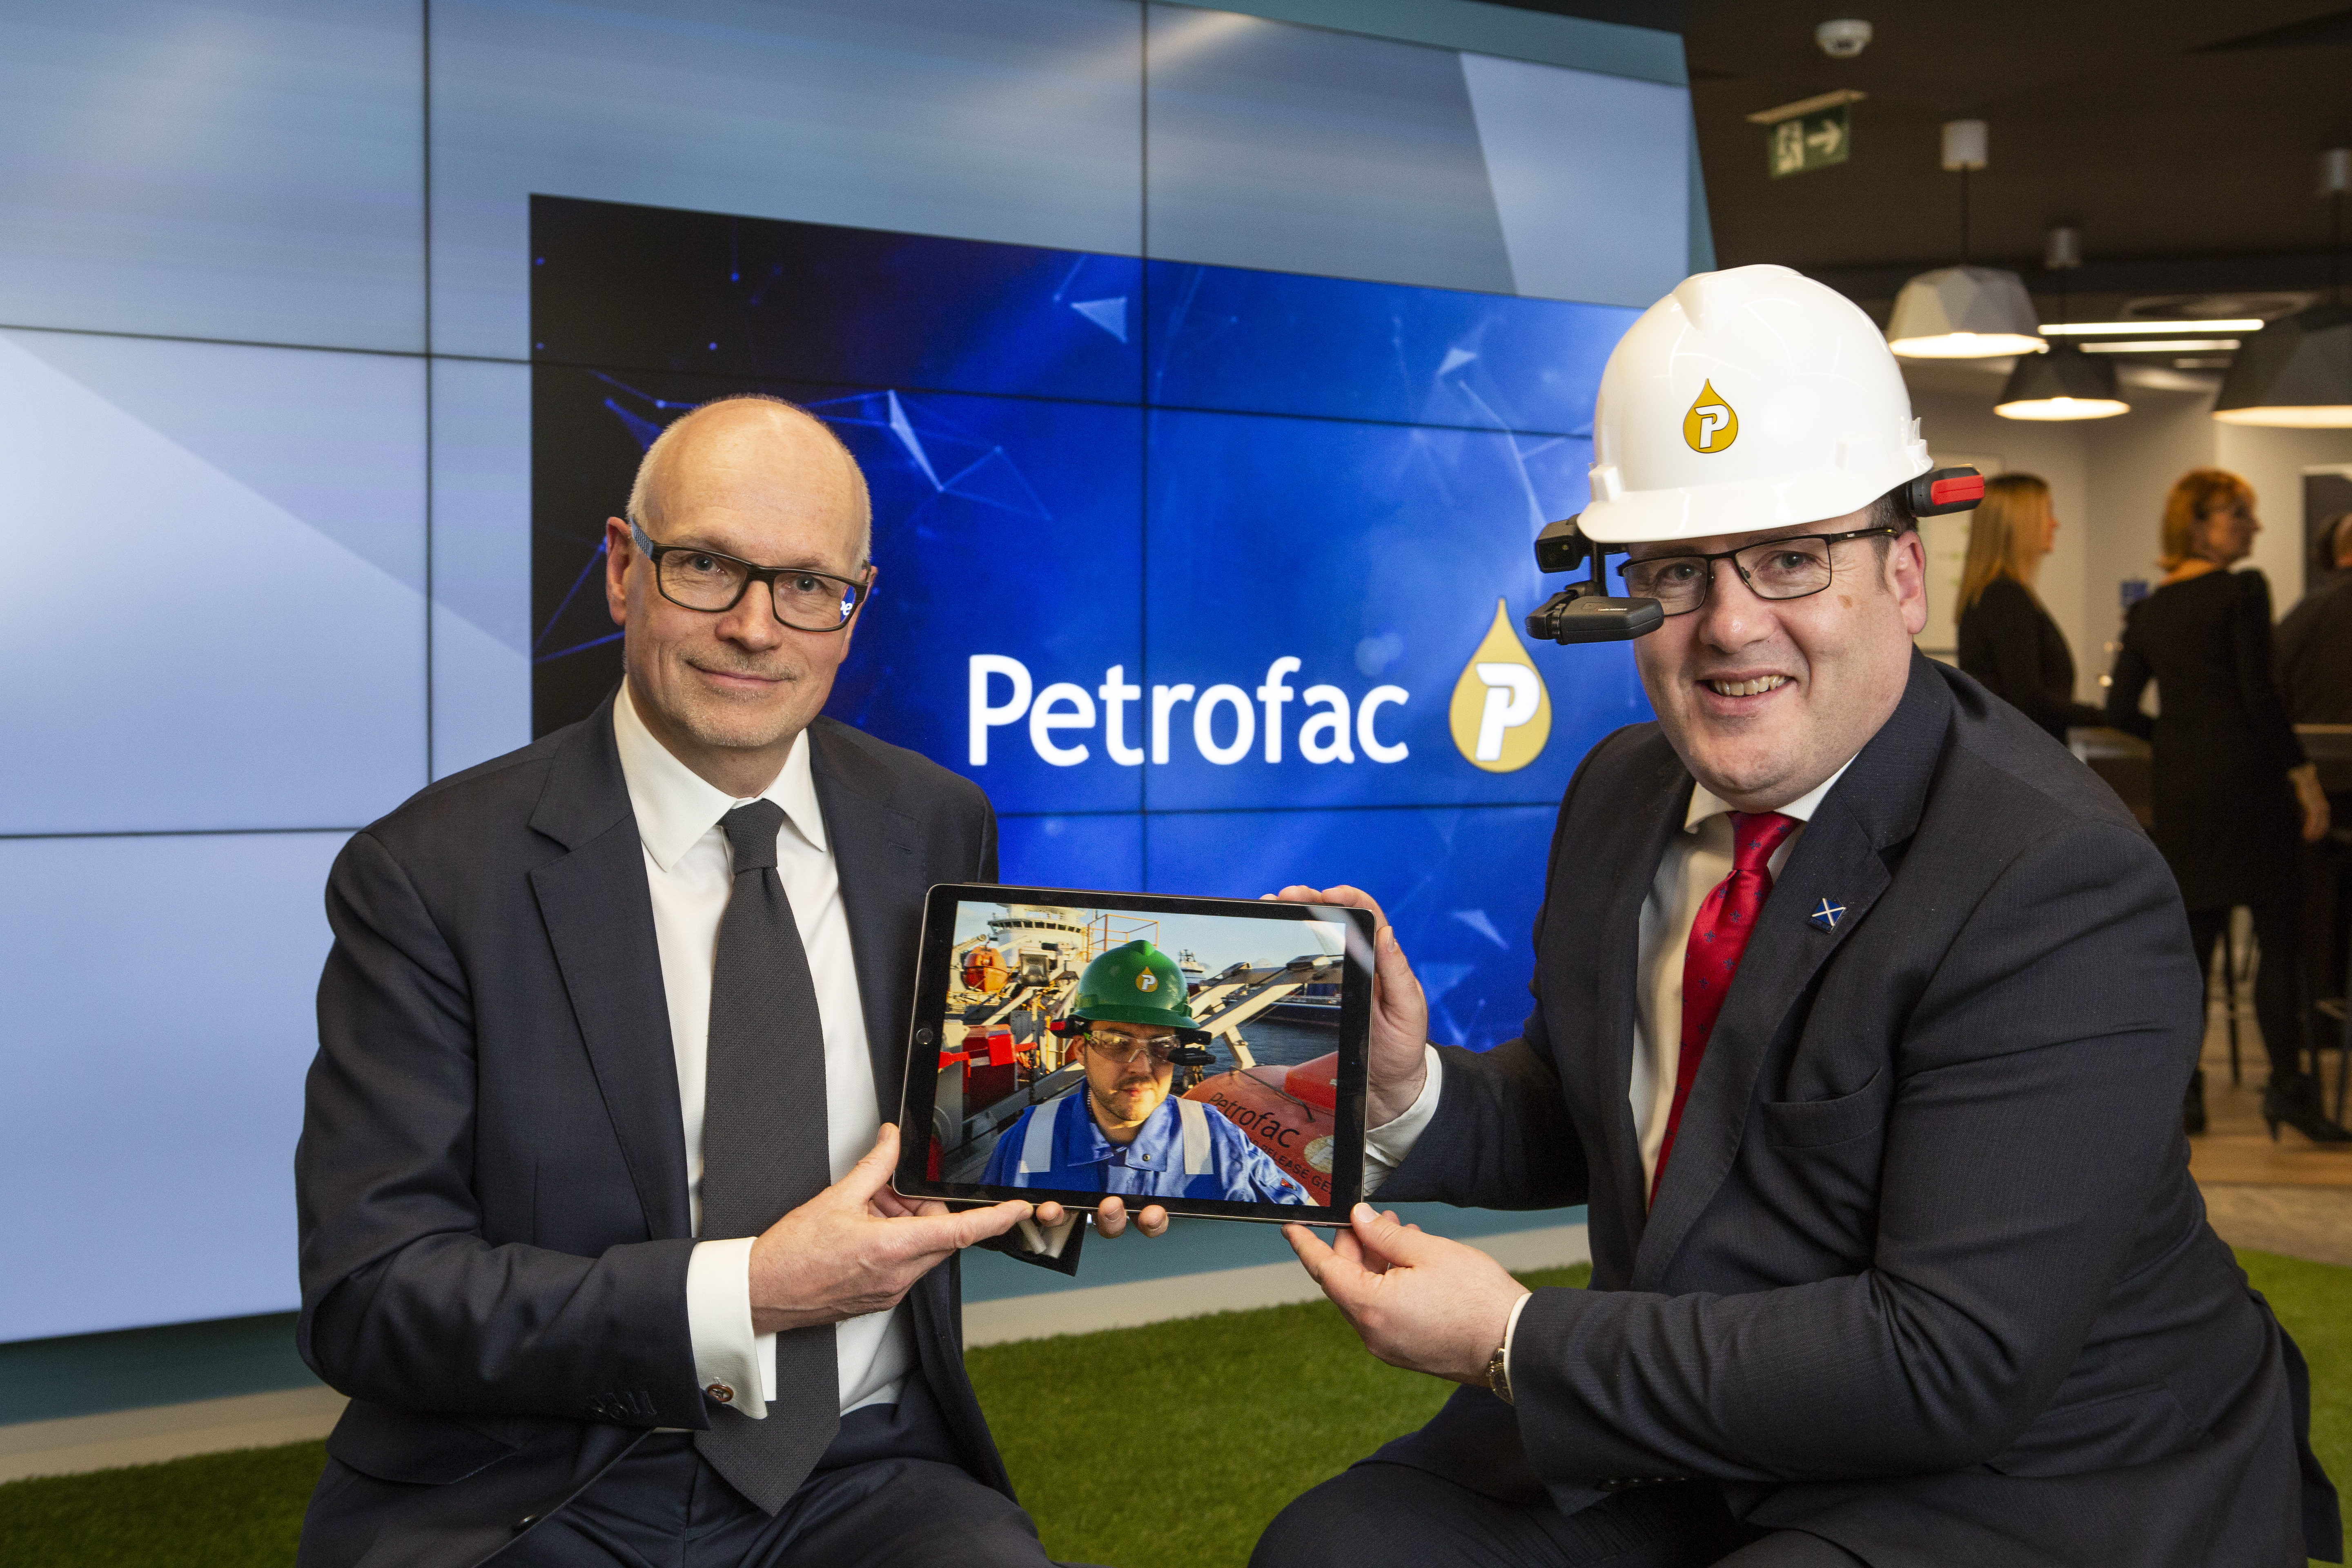 Petrofac chief operating officer John Pearson (left) at the Inovation Zone launch event with Scottish energy minister Paul Wheelhouse